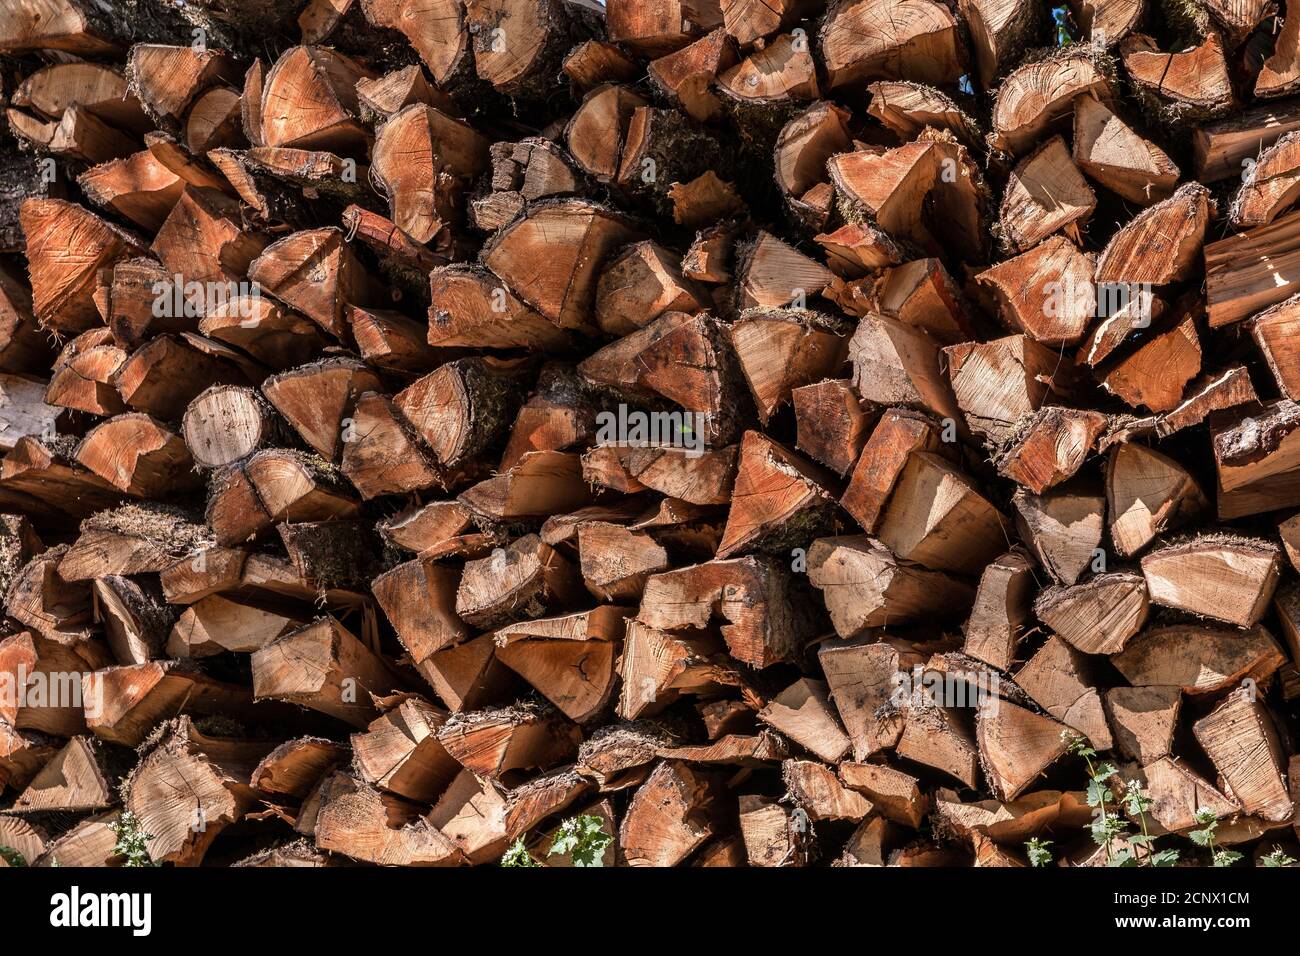 Woodpile of firewood to heat the house in cold times Stock Photo